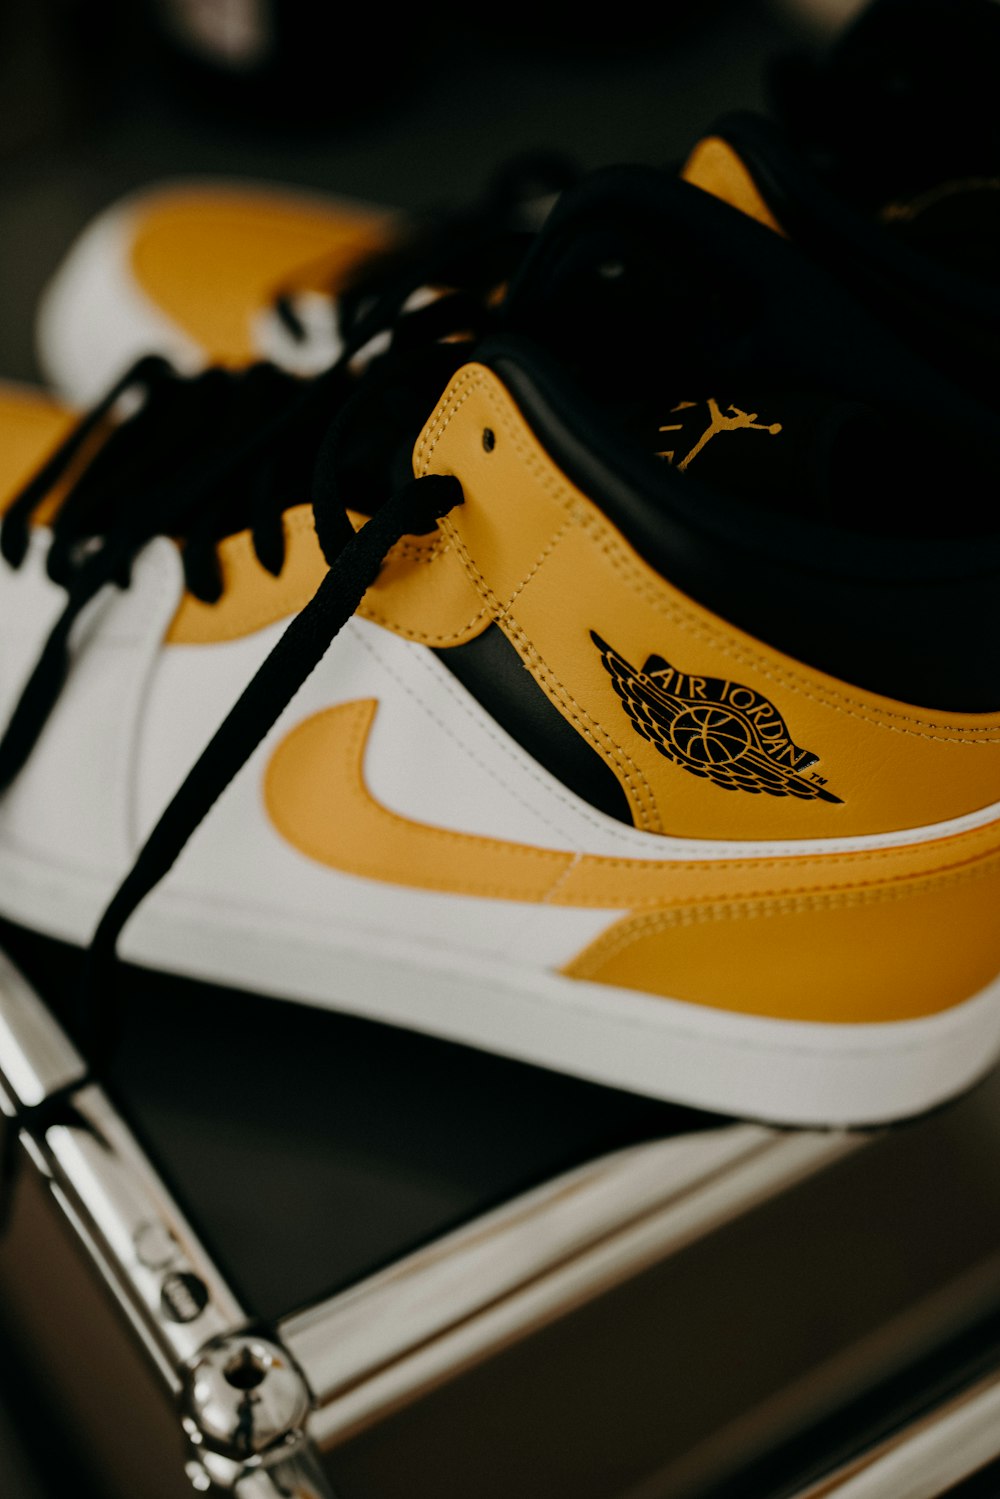 yellow and white nike air force 1 shoes photo – Free Nike Image on Unsplash